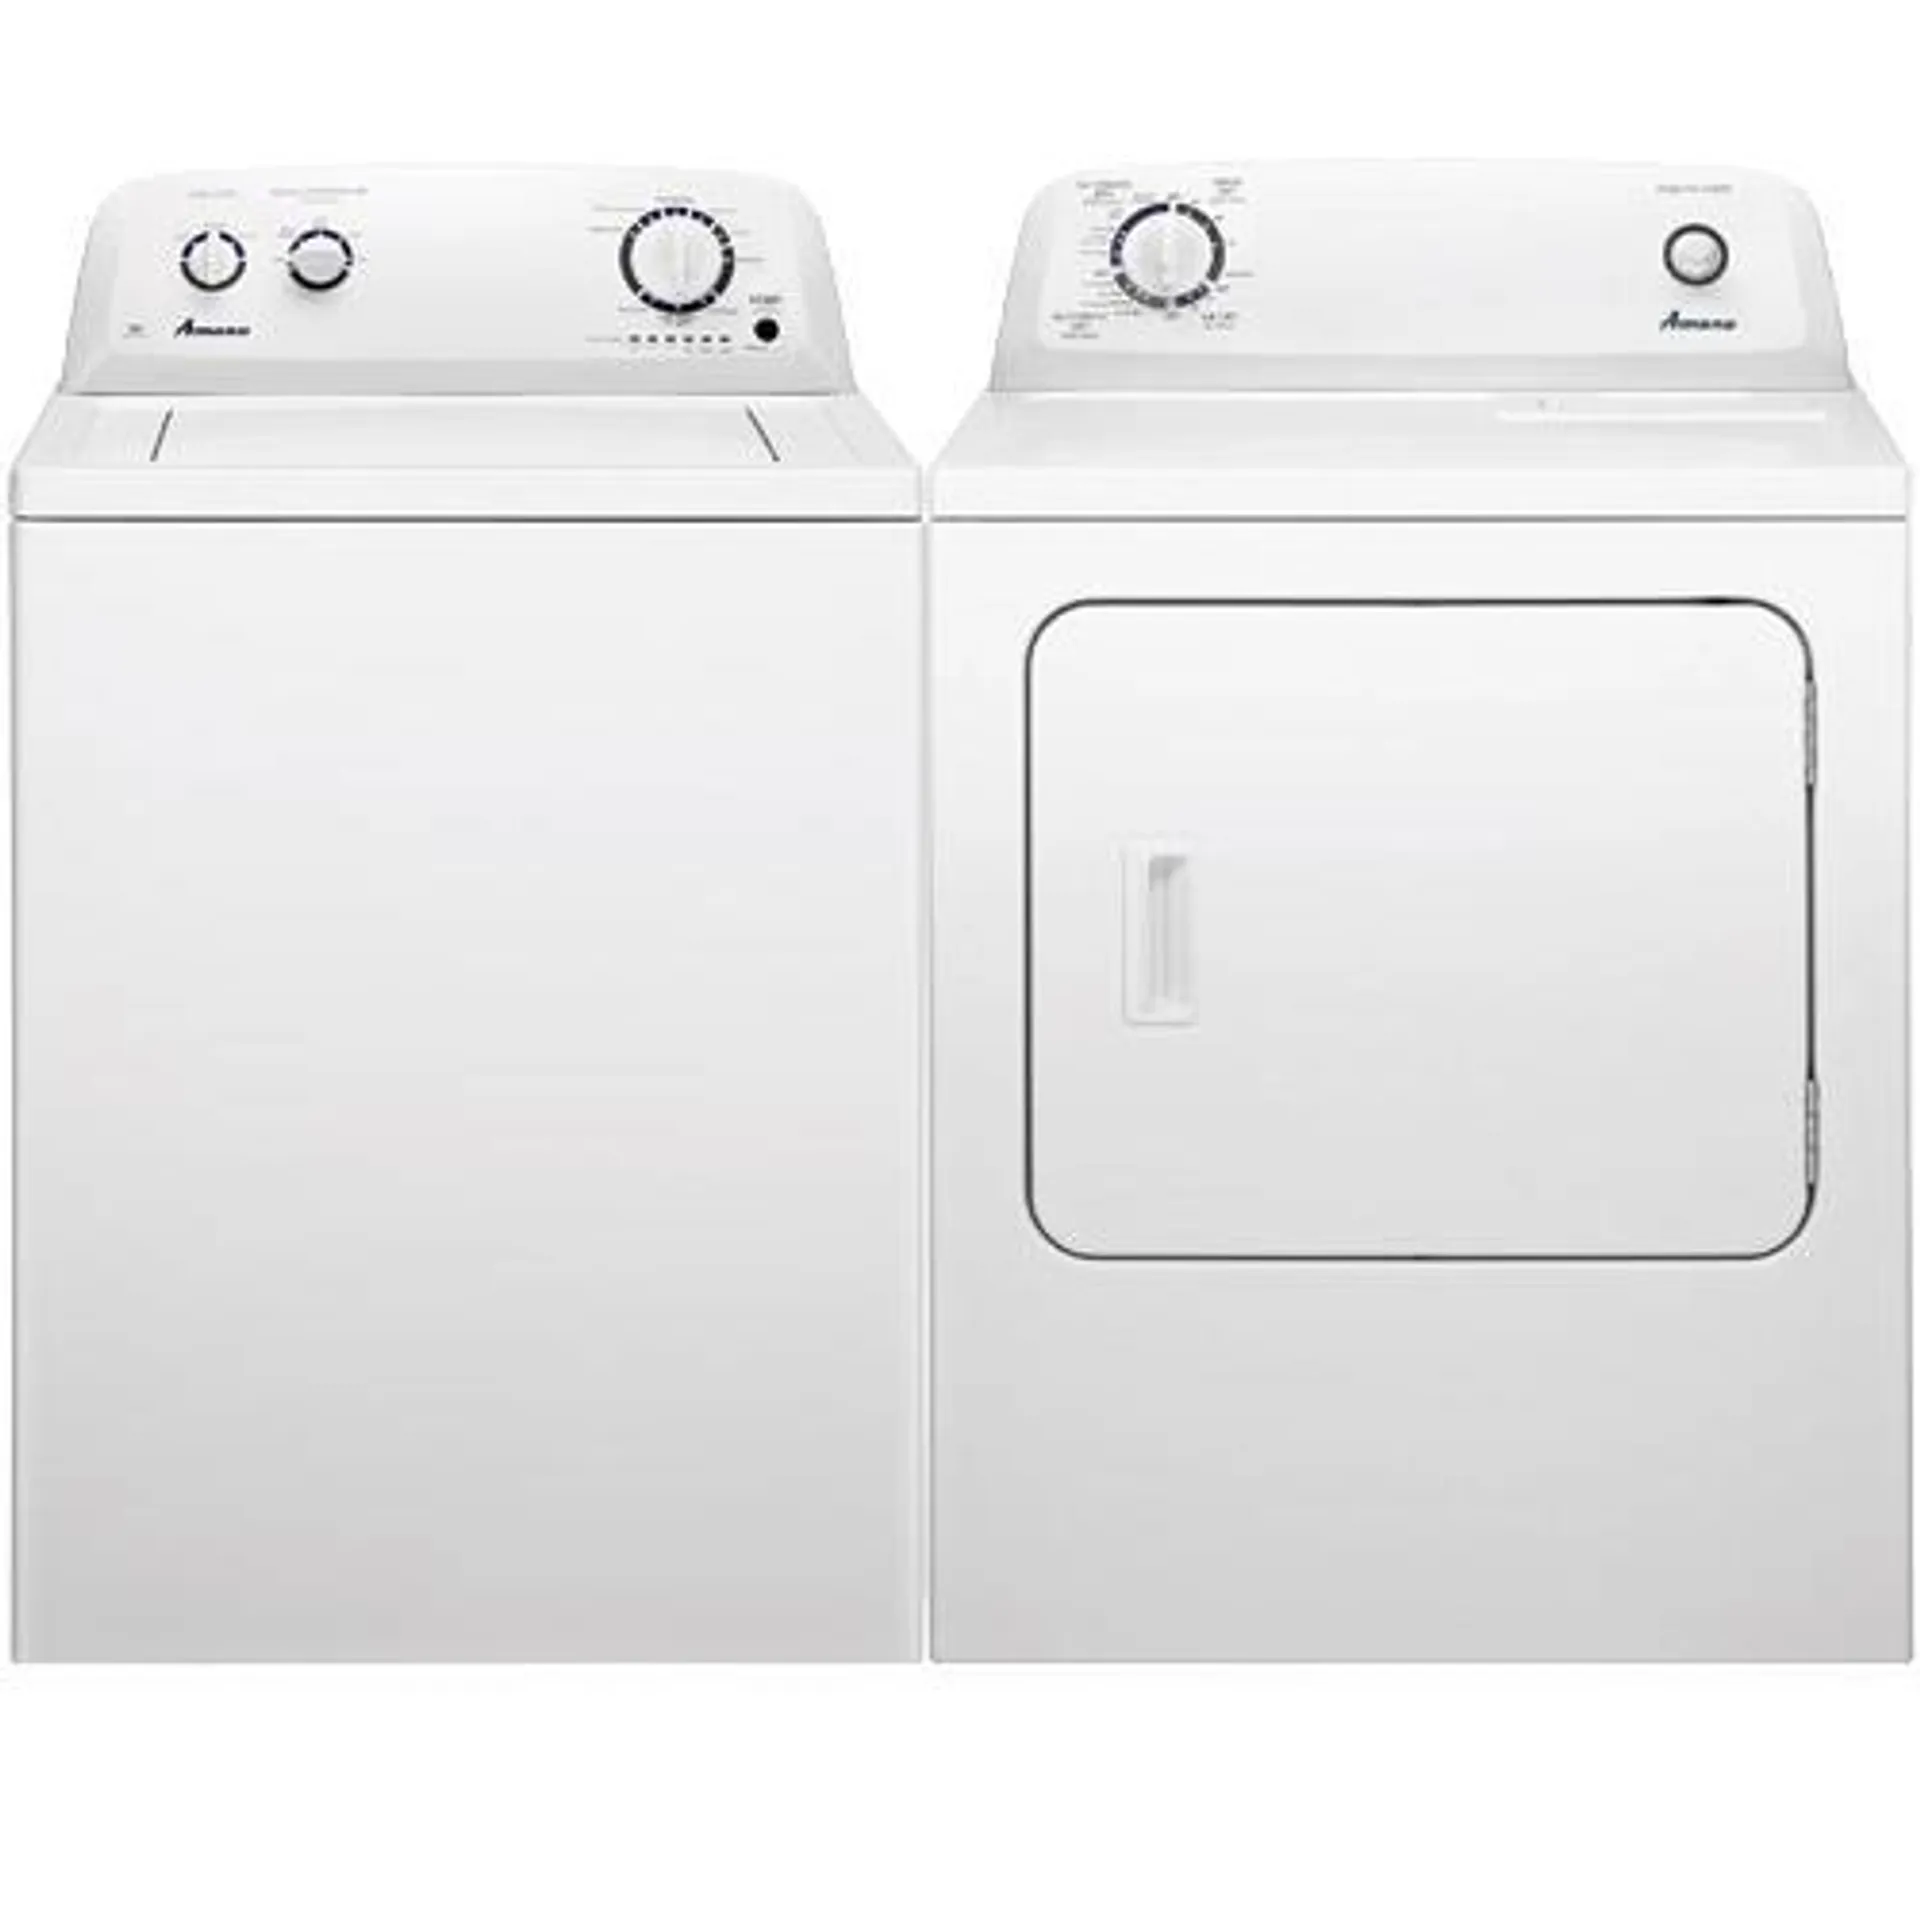 3.5 CuFt 9-Cycle Top Load Washer With 6.5 CuFt Electric Dryer With Automatic Sensor Dry In White